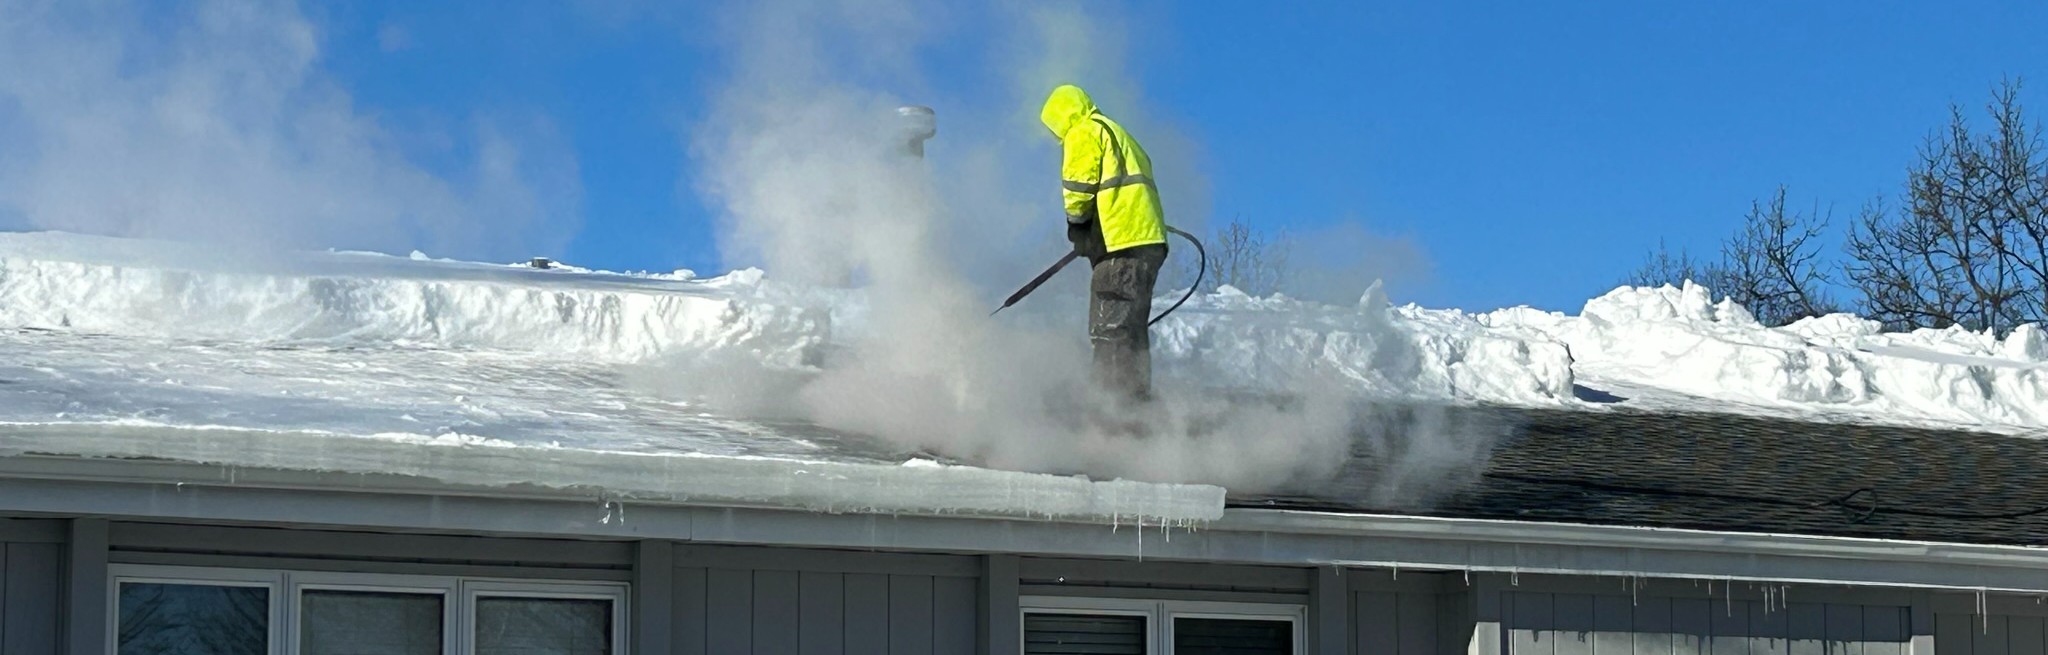 Removing ice dam to stop roof leaking.